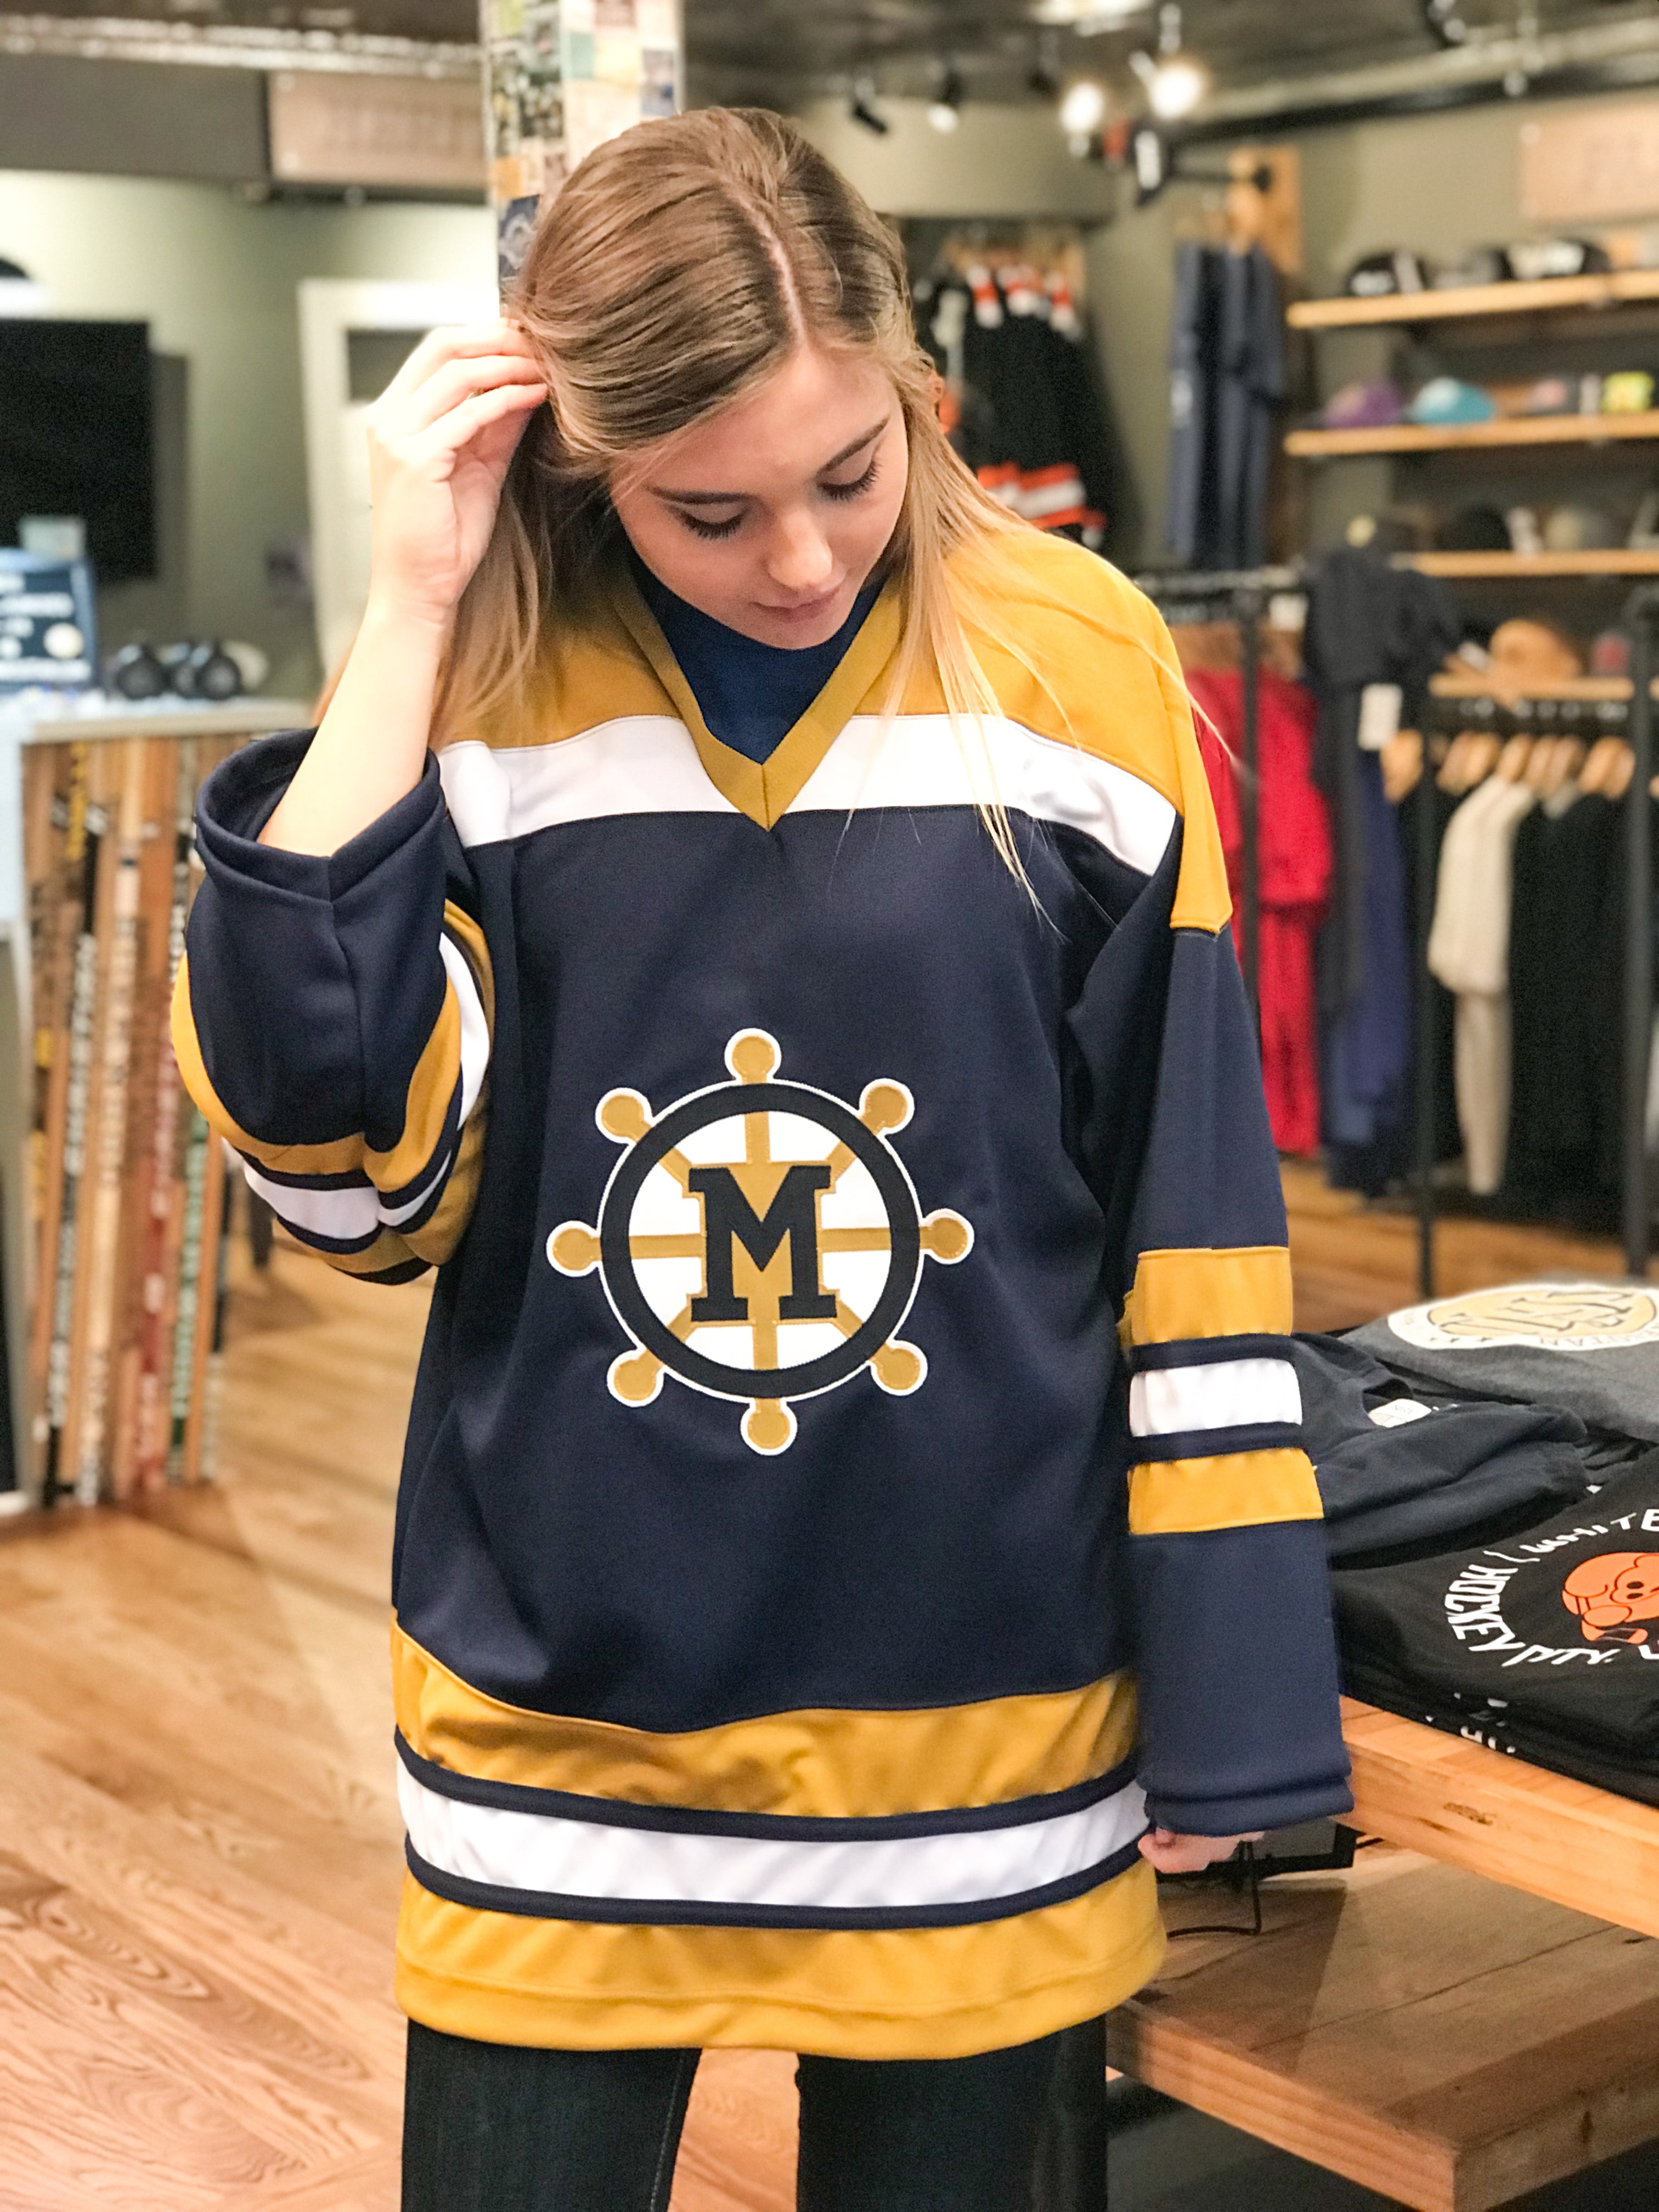 Vintage Hockey Jersey for sale